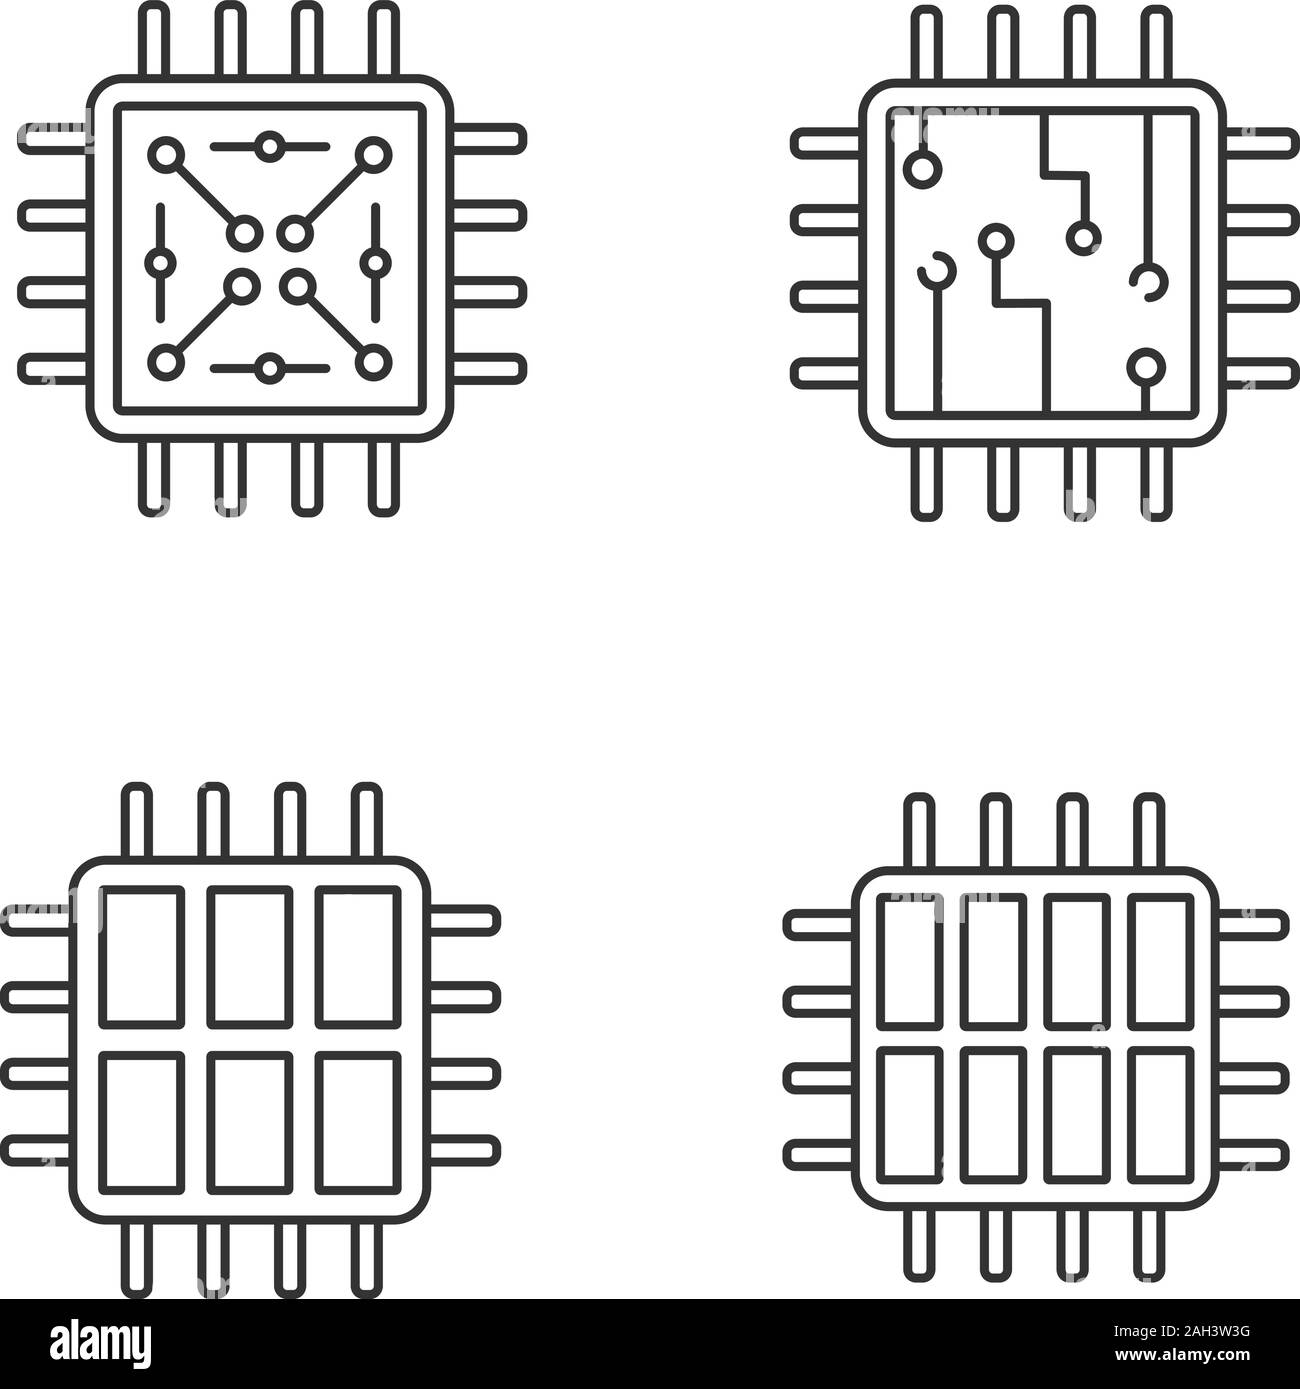 Processors linear icons set. Chip, microprocessor, integrated unit, six and octa core processors. Thin line contour symbols. Isolated vector outline i Stock Vector